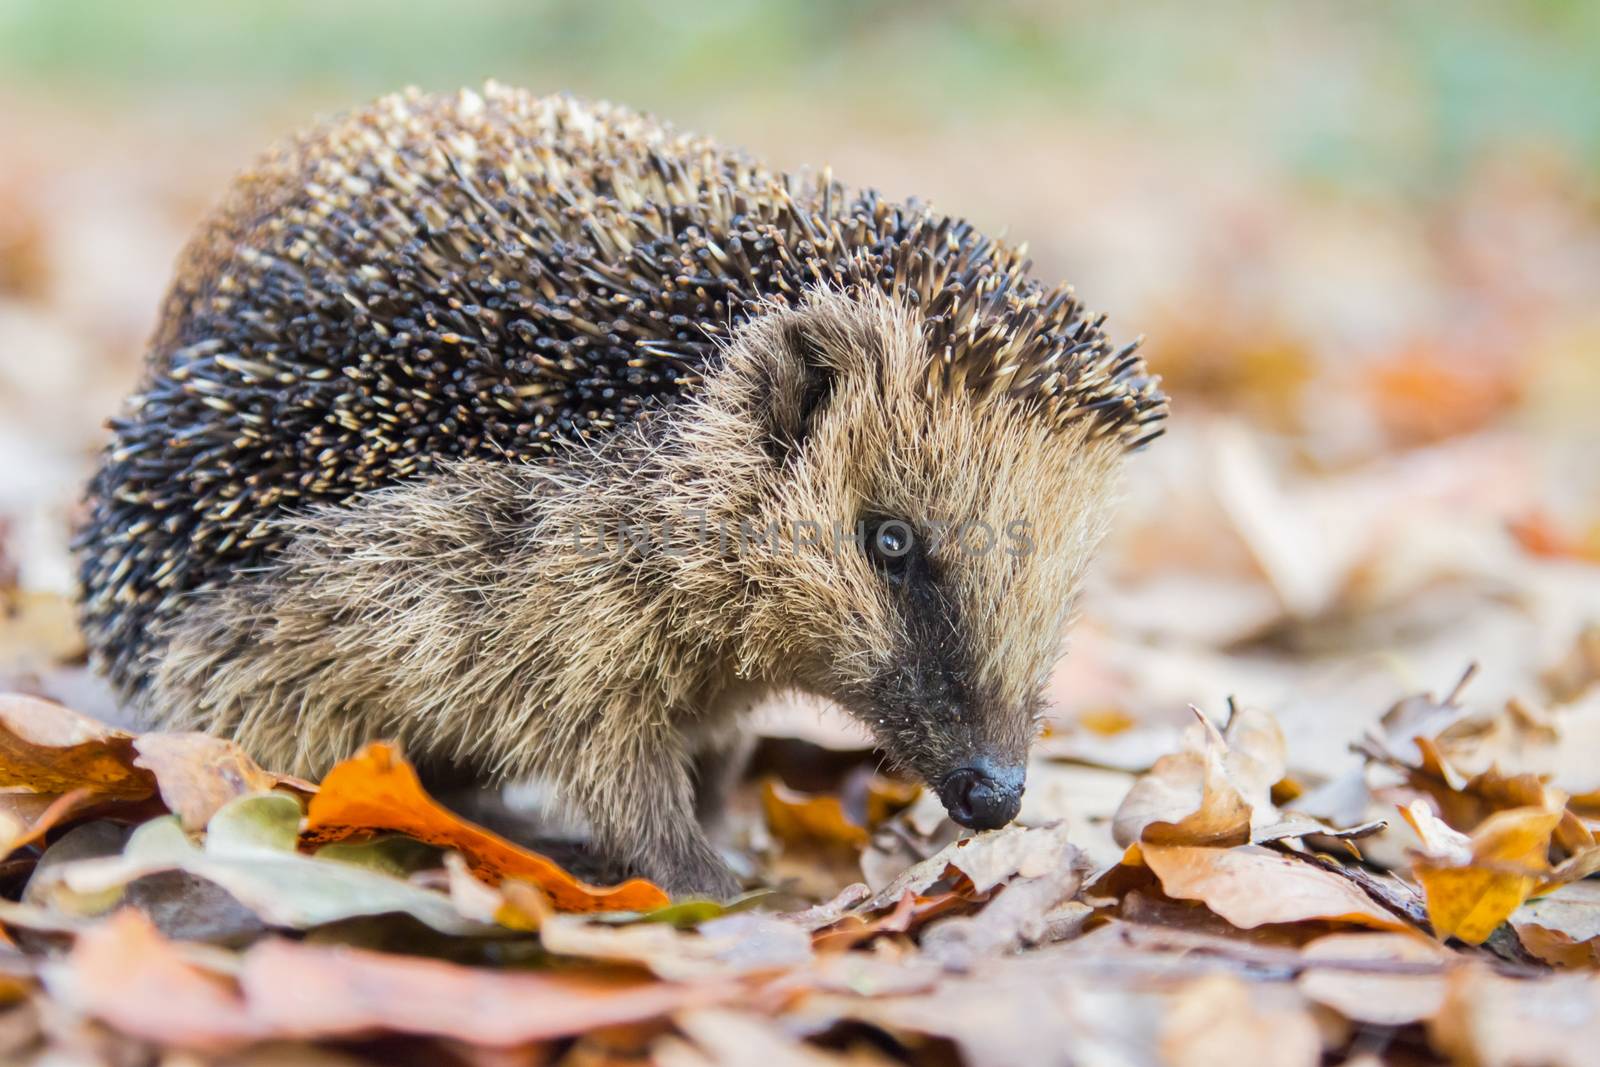 Hedgehog in autumn leaves by BenSchonewille